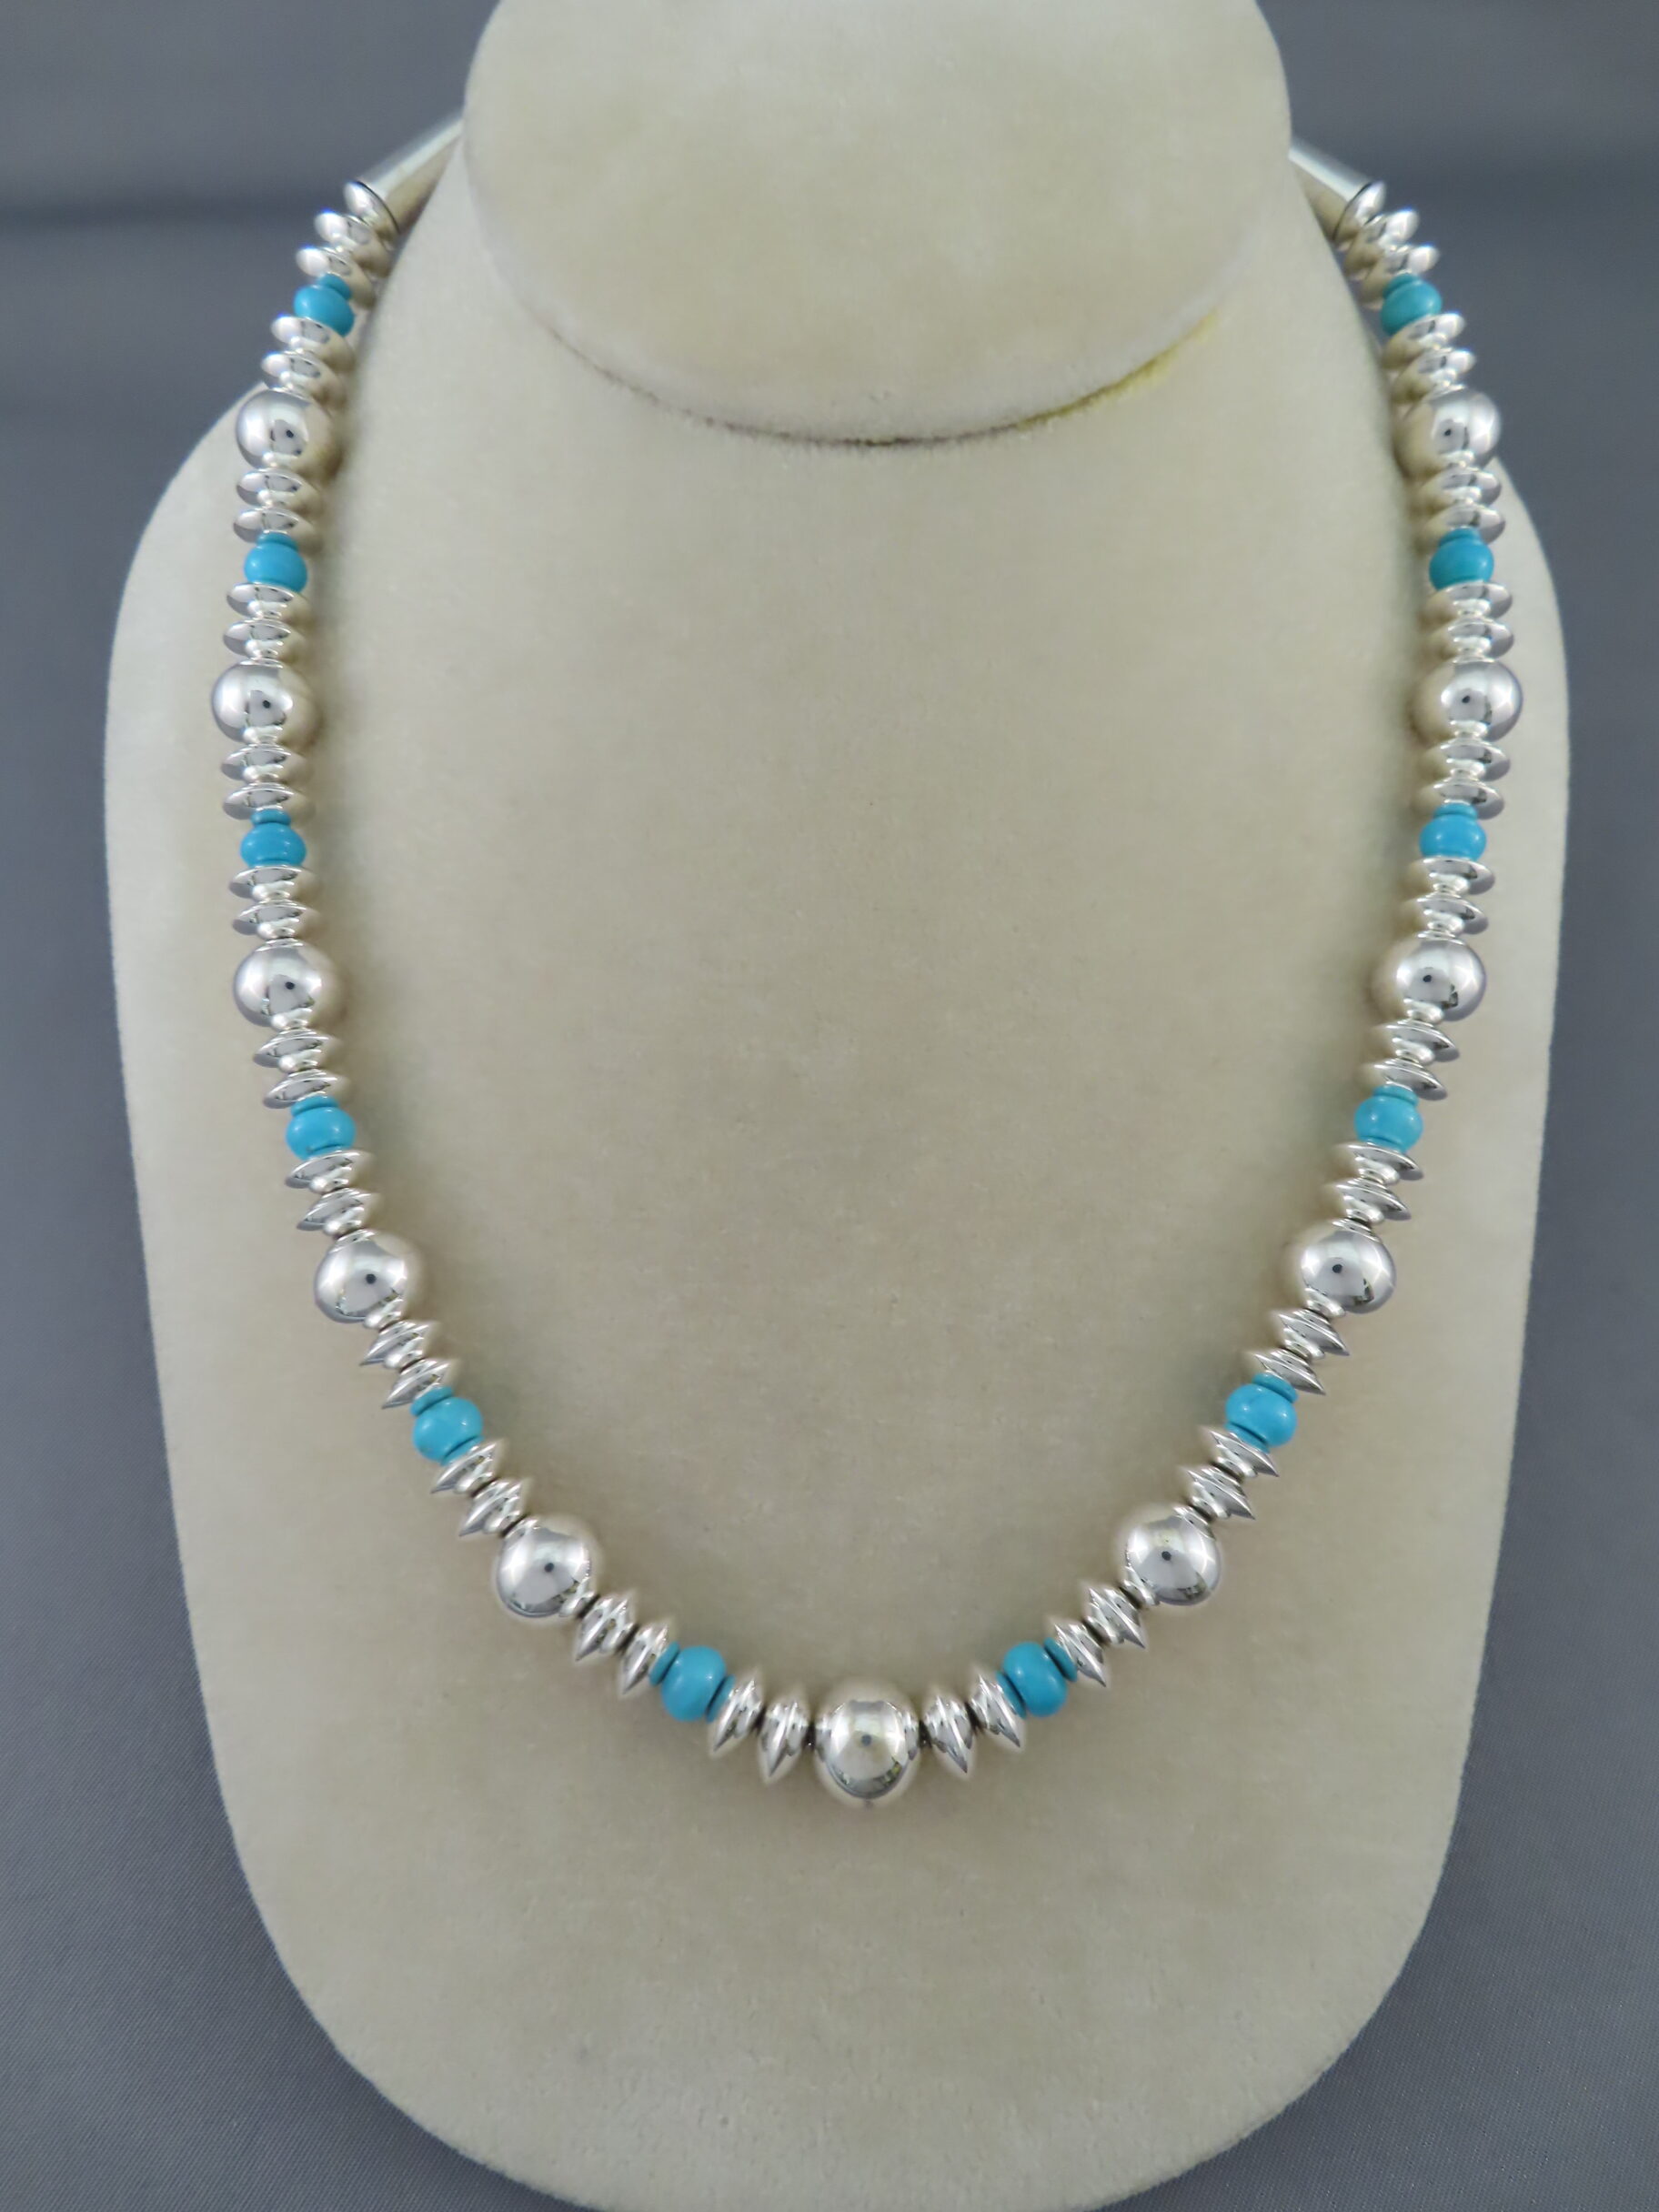 Native American Jewelry - Sterling Silver Bead Necklace with Sleeping Beauty Turquoise by Artie Yellowhorse $895- FOR SALE